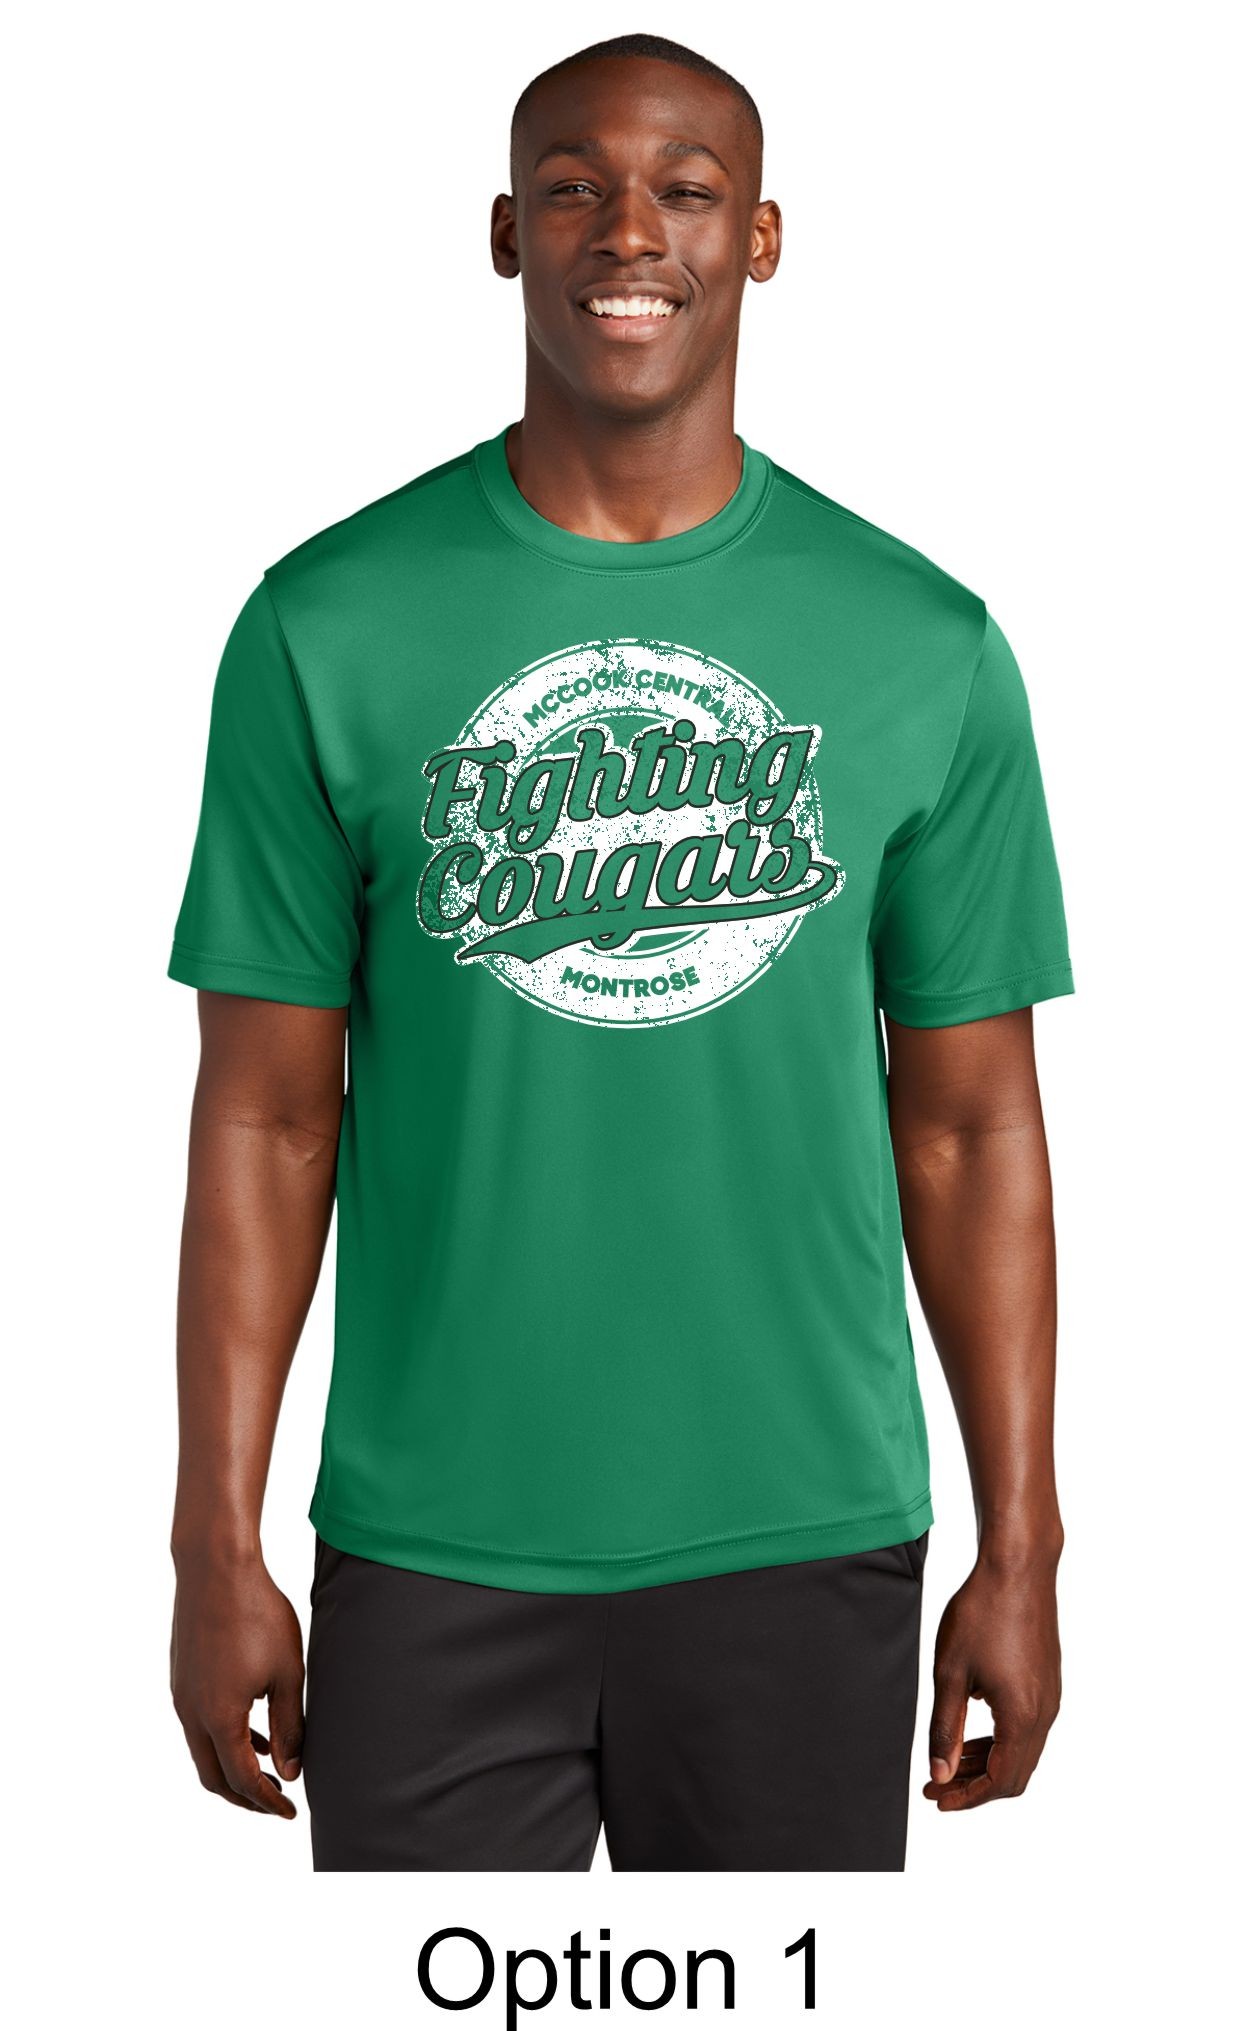 MCM Fighting Cougars Customizable Dri-Fit T-Shirt - Kelly Green